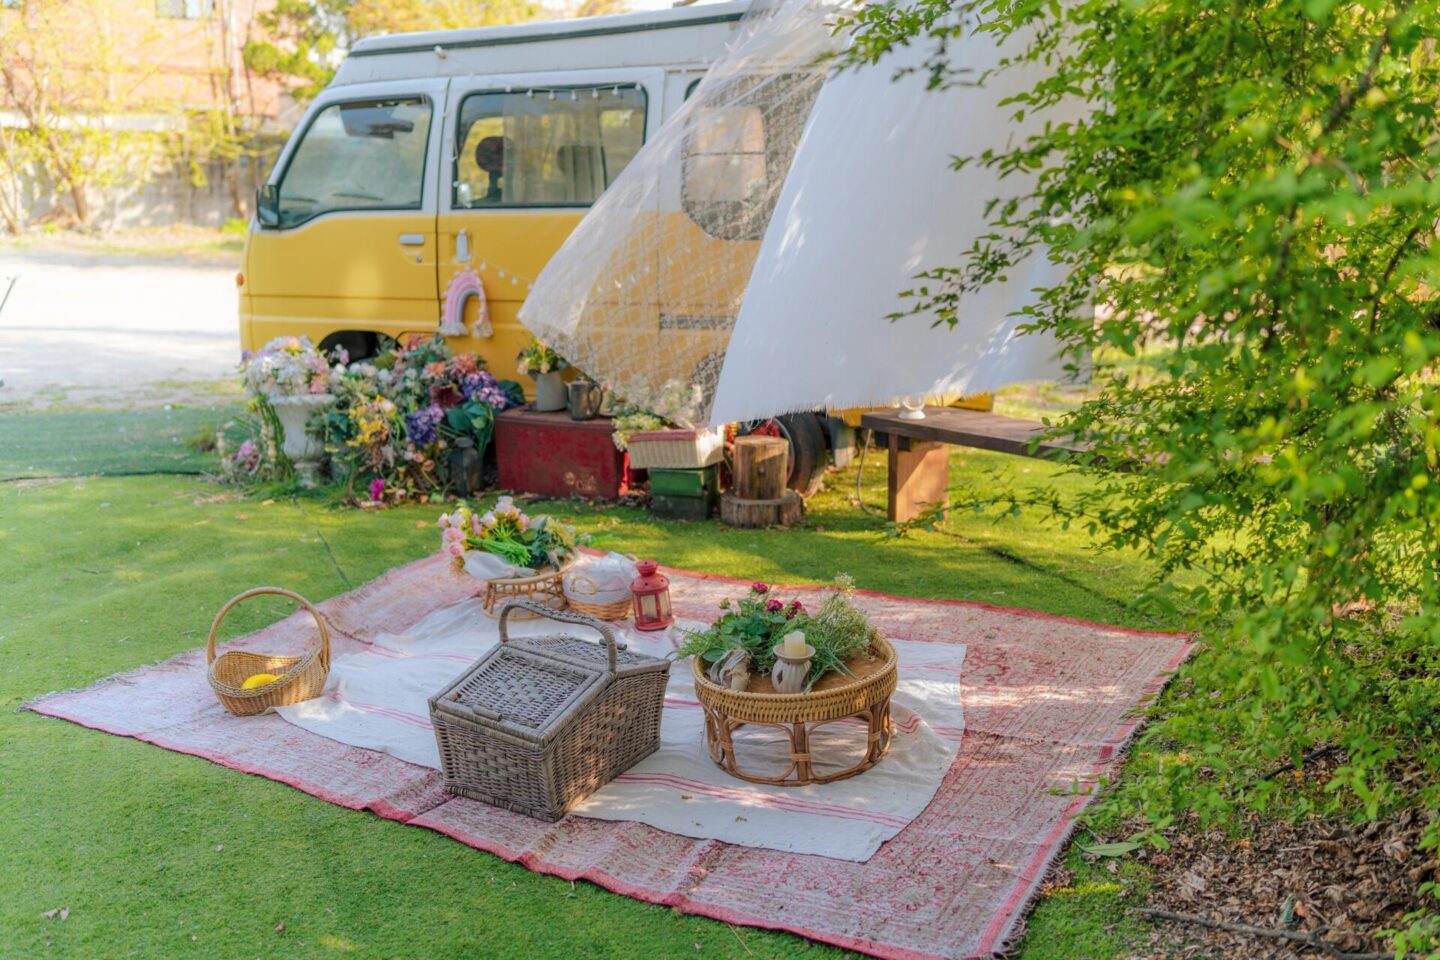 Picnics To Perfection: How to Set Up An Outdoor Family Event That Everyone Will Love